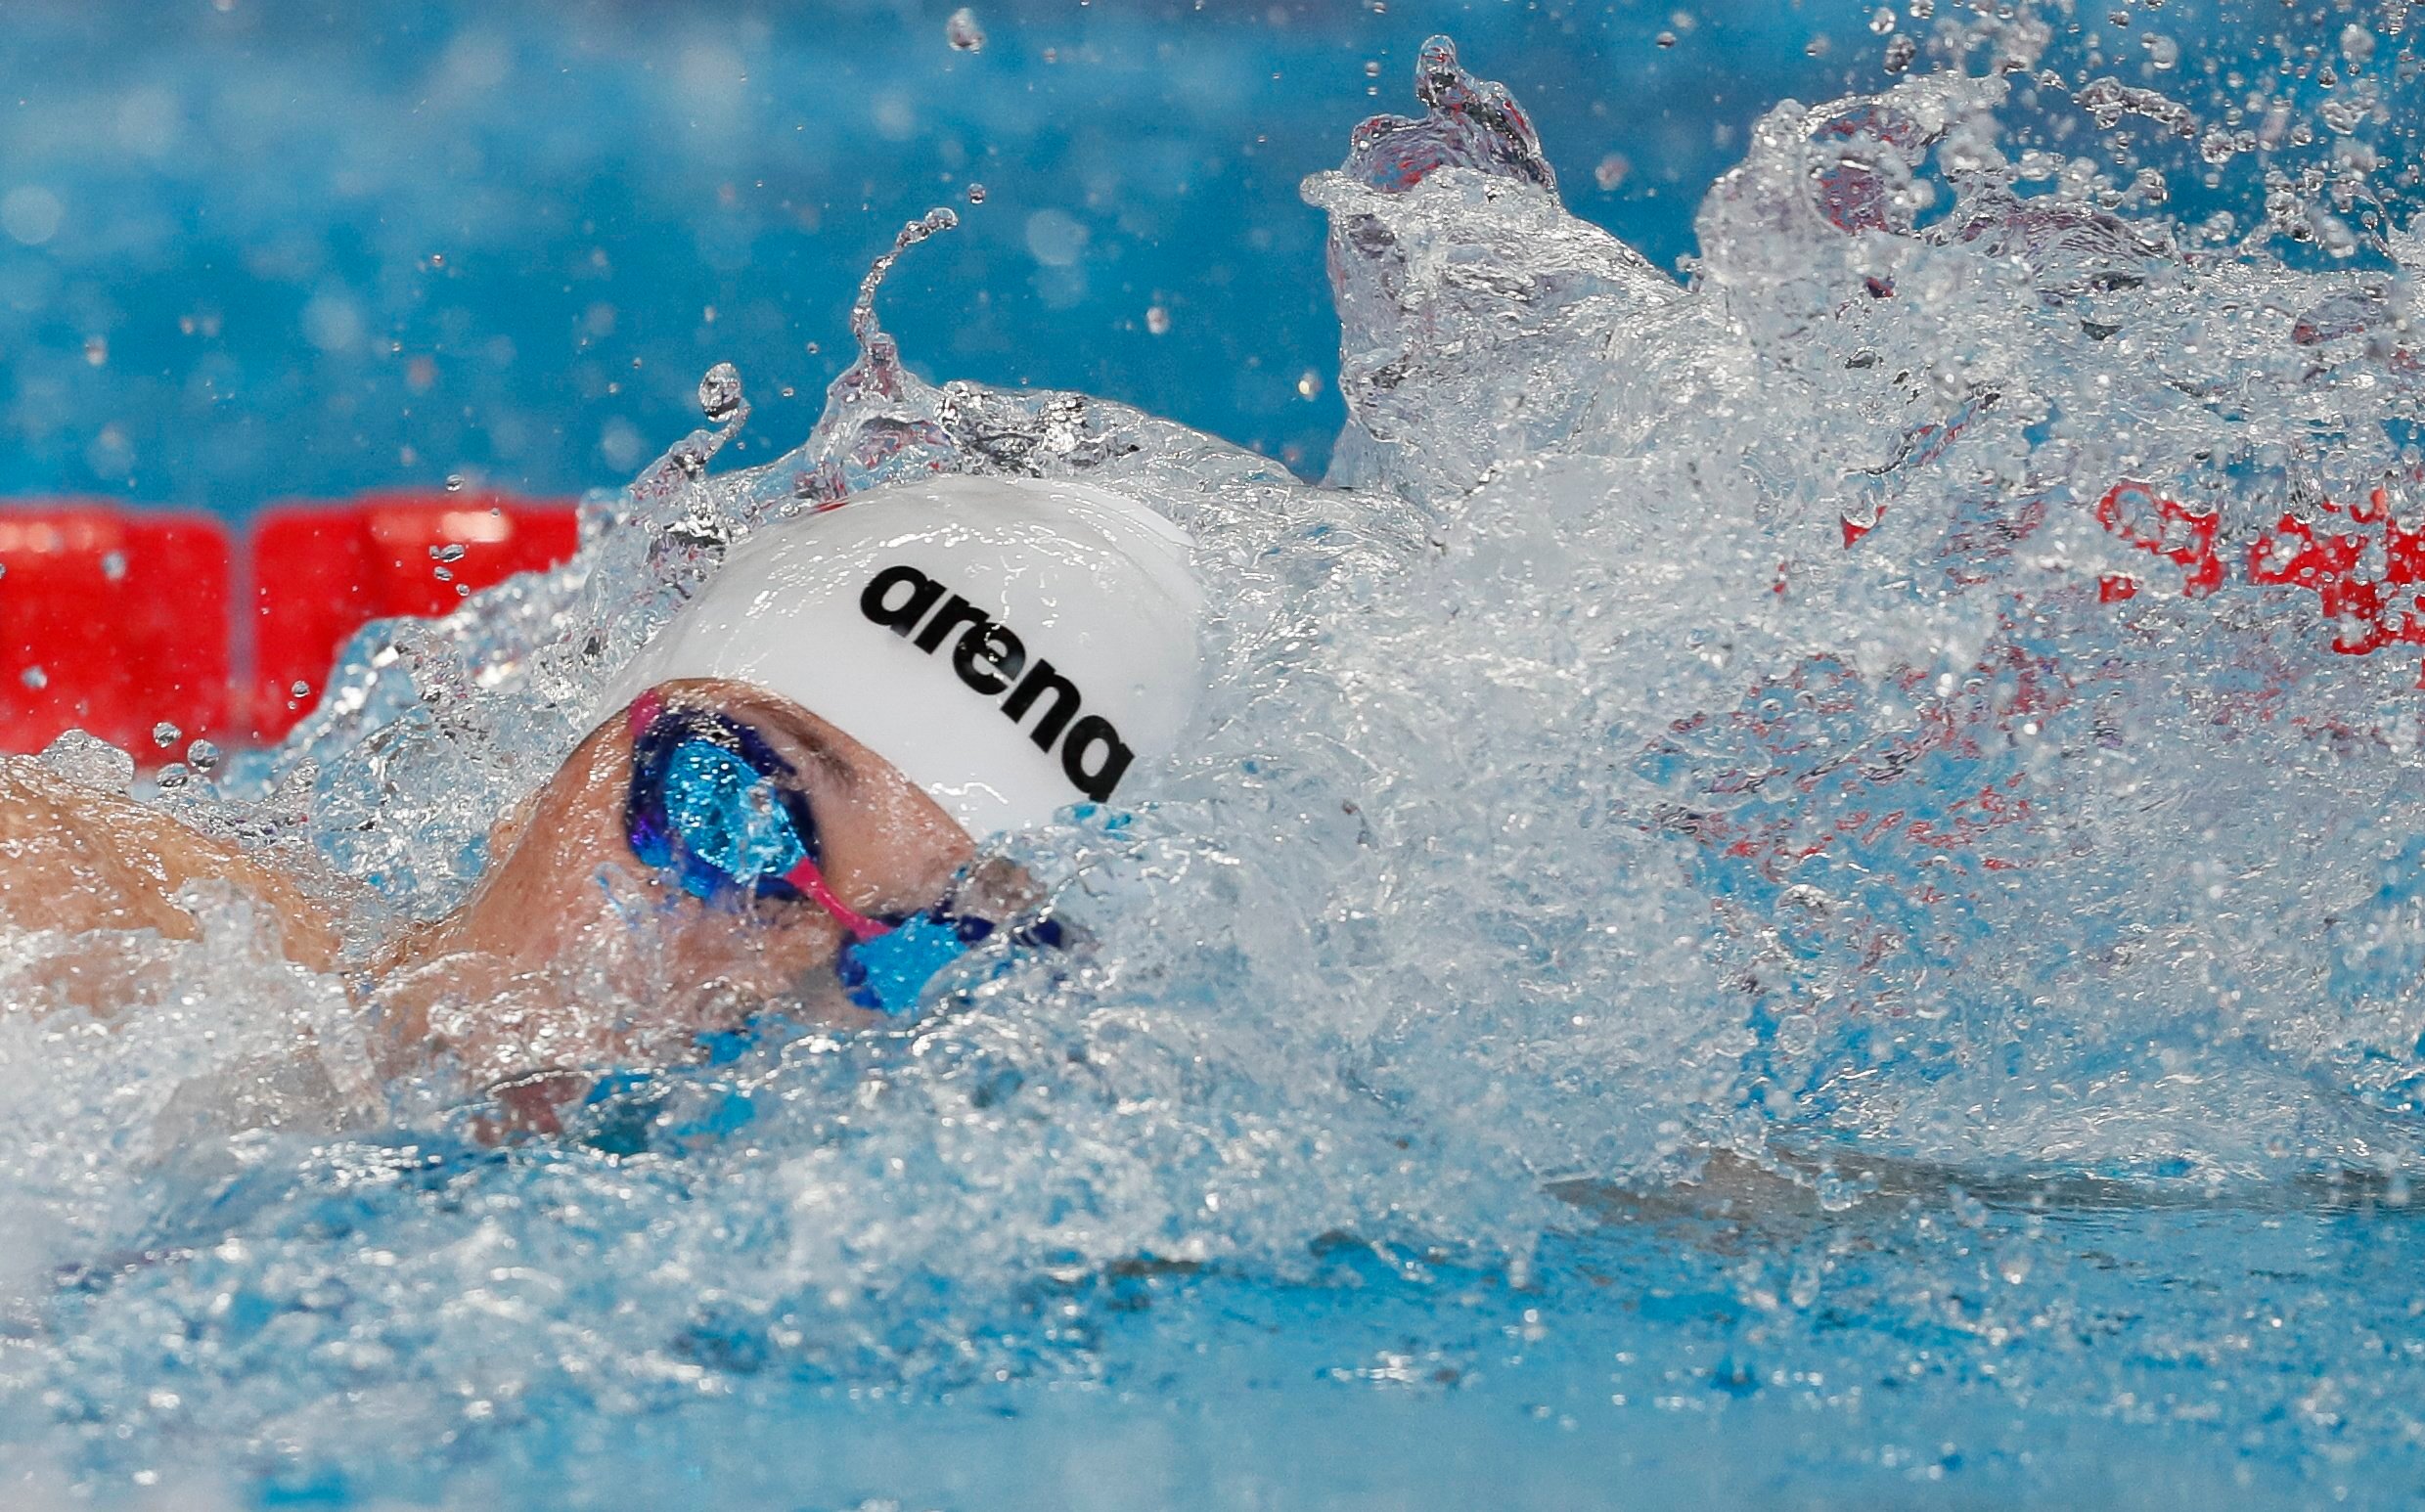 Siobhan Bernadette Haughey competes in the Women’s 100m Freestyle Final at the Fina World Aquatics Championships in Doha, Qatar, in February. Photo: EPA-EFE